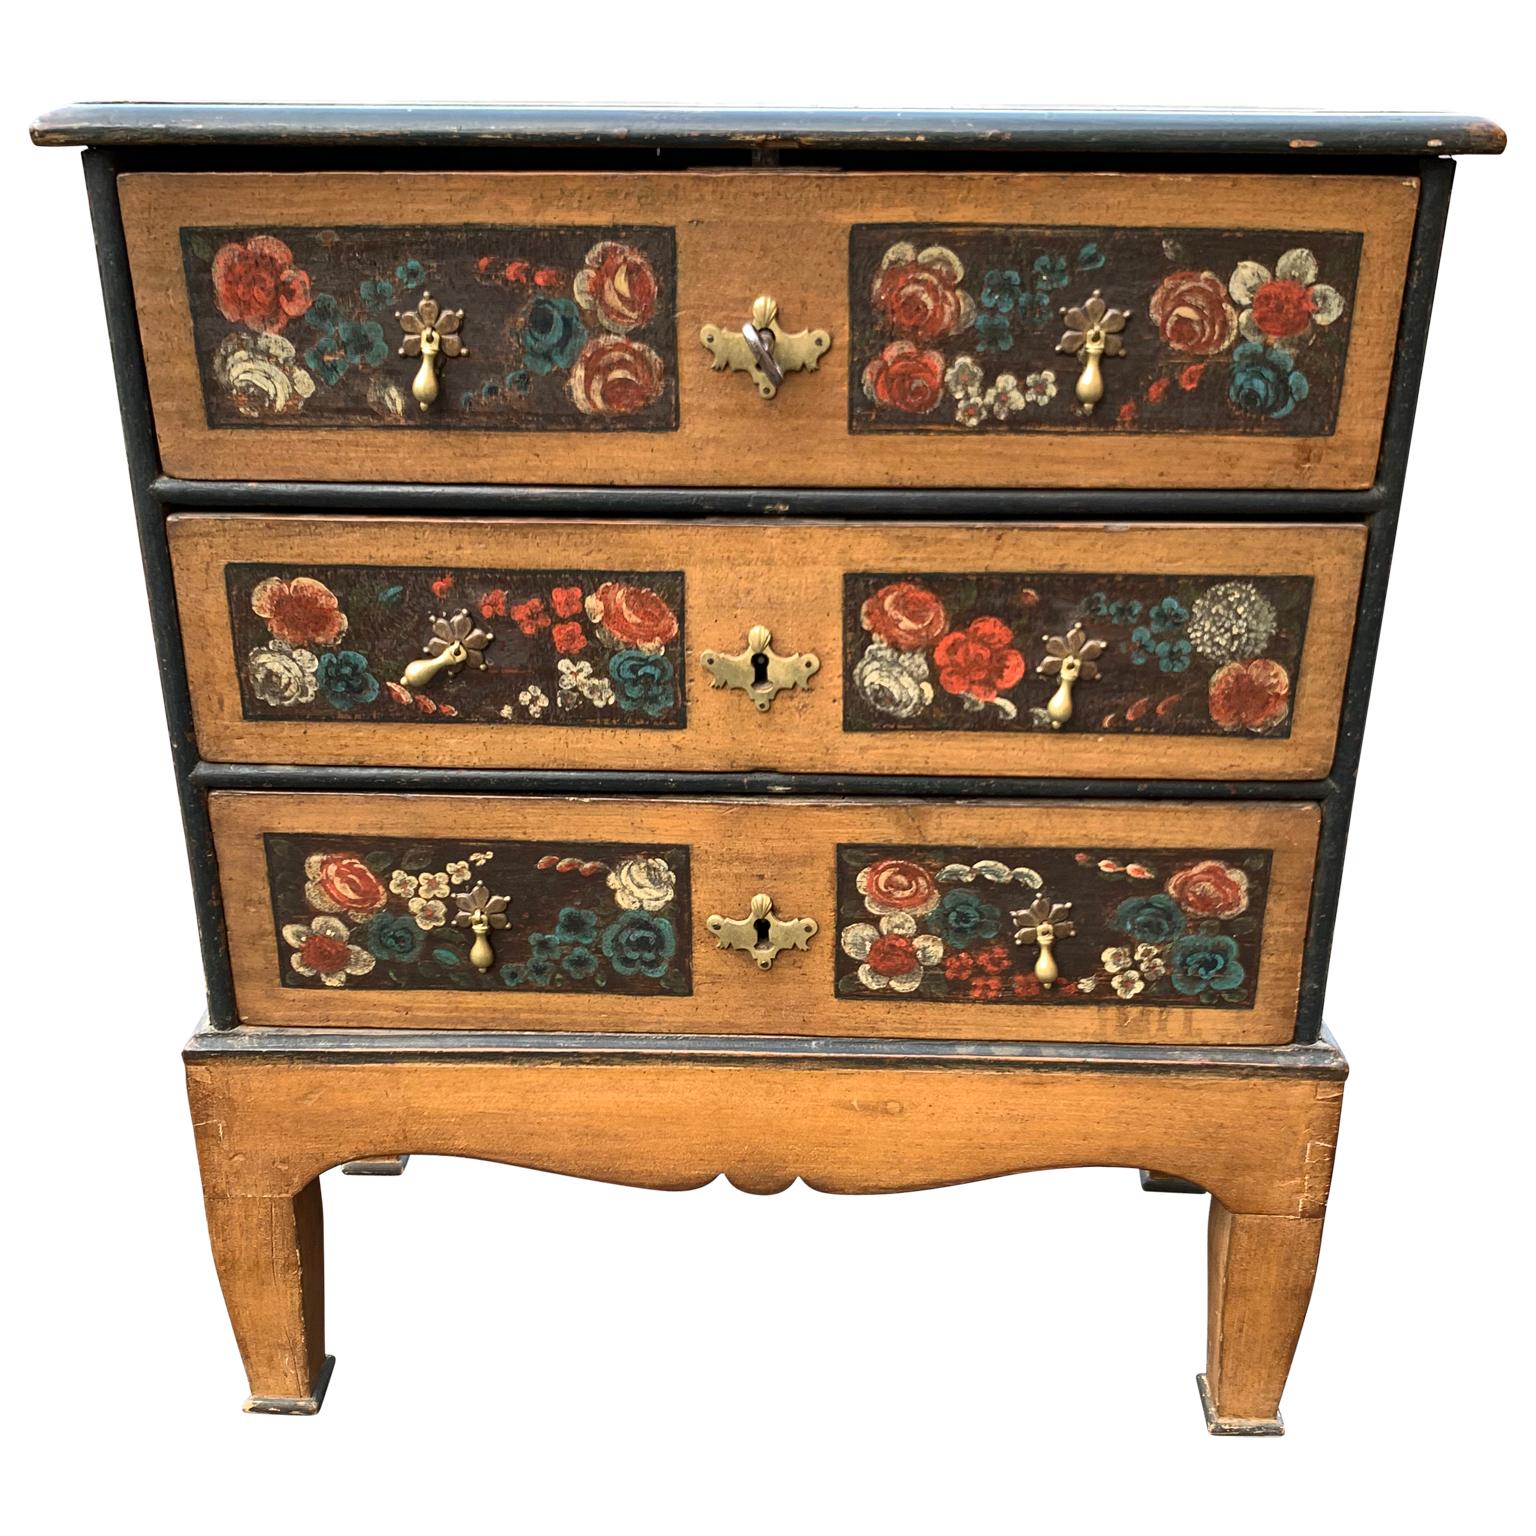 Danish 18th century painted Folk Art chest of drawers.

The chest has three drawers and original hardware and locks with one key.